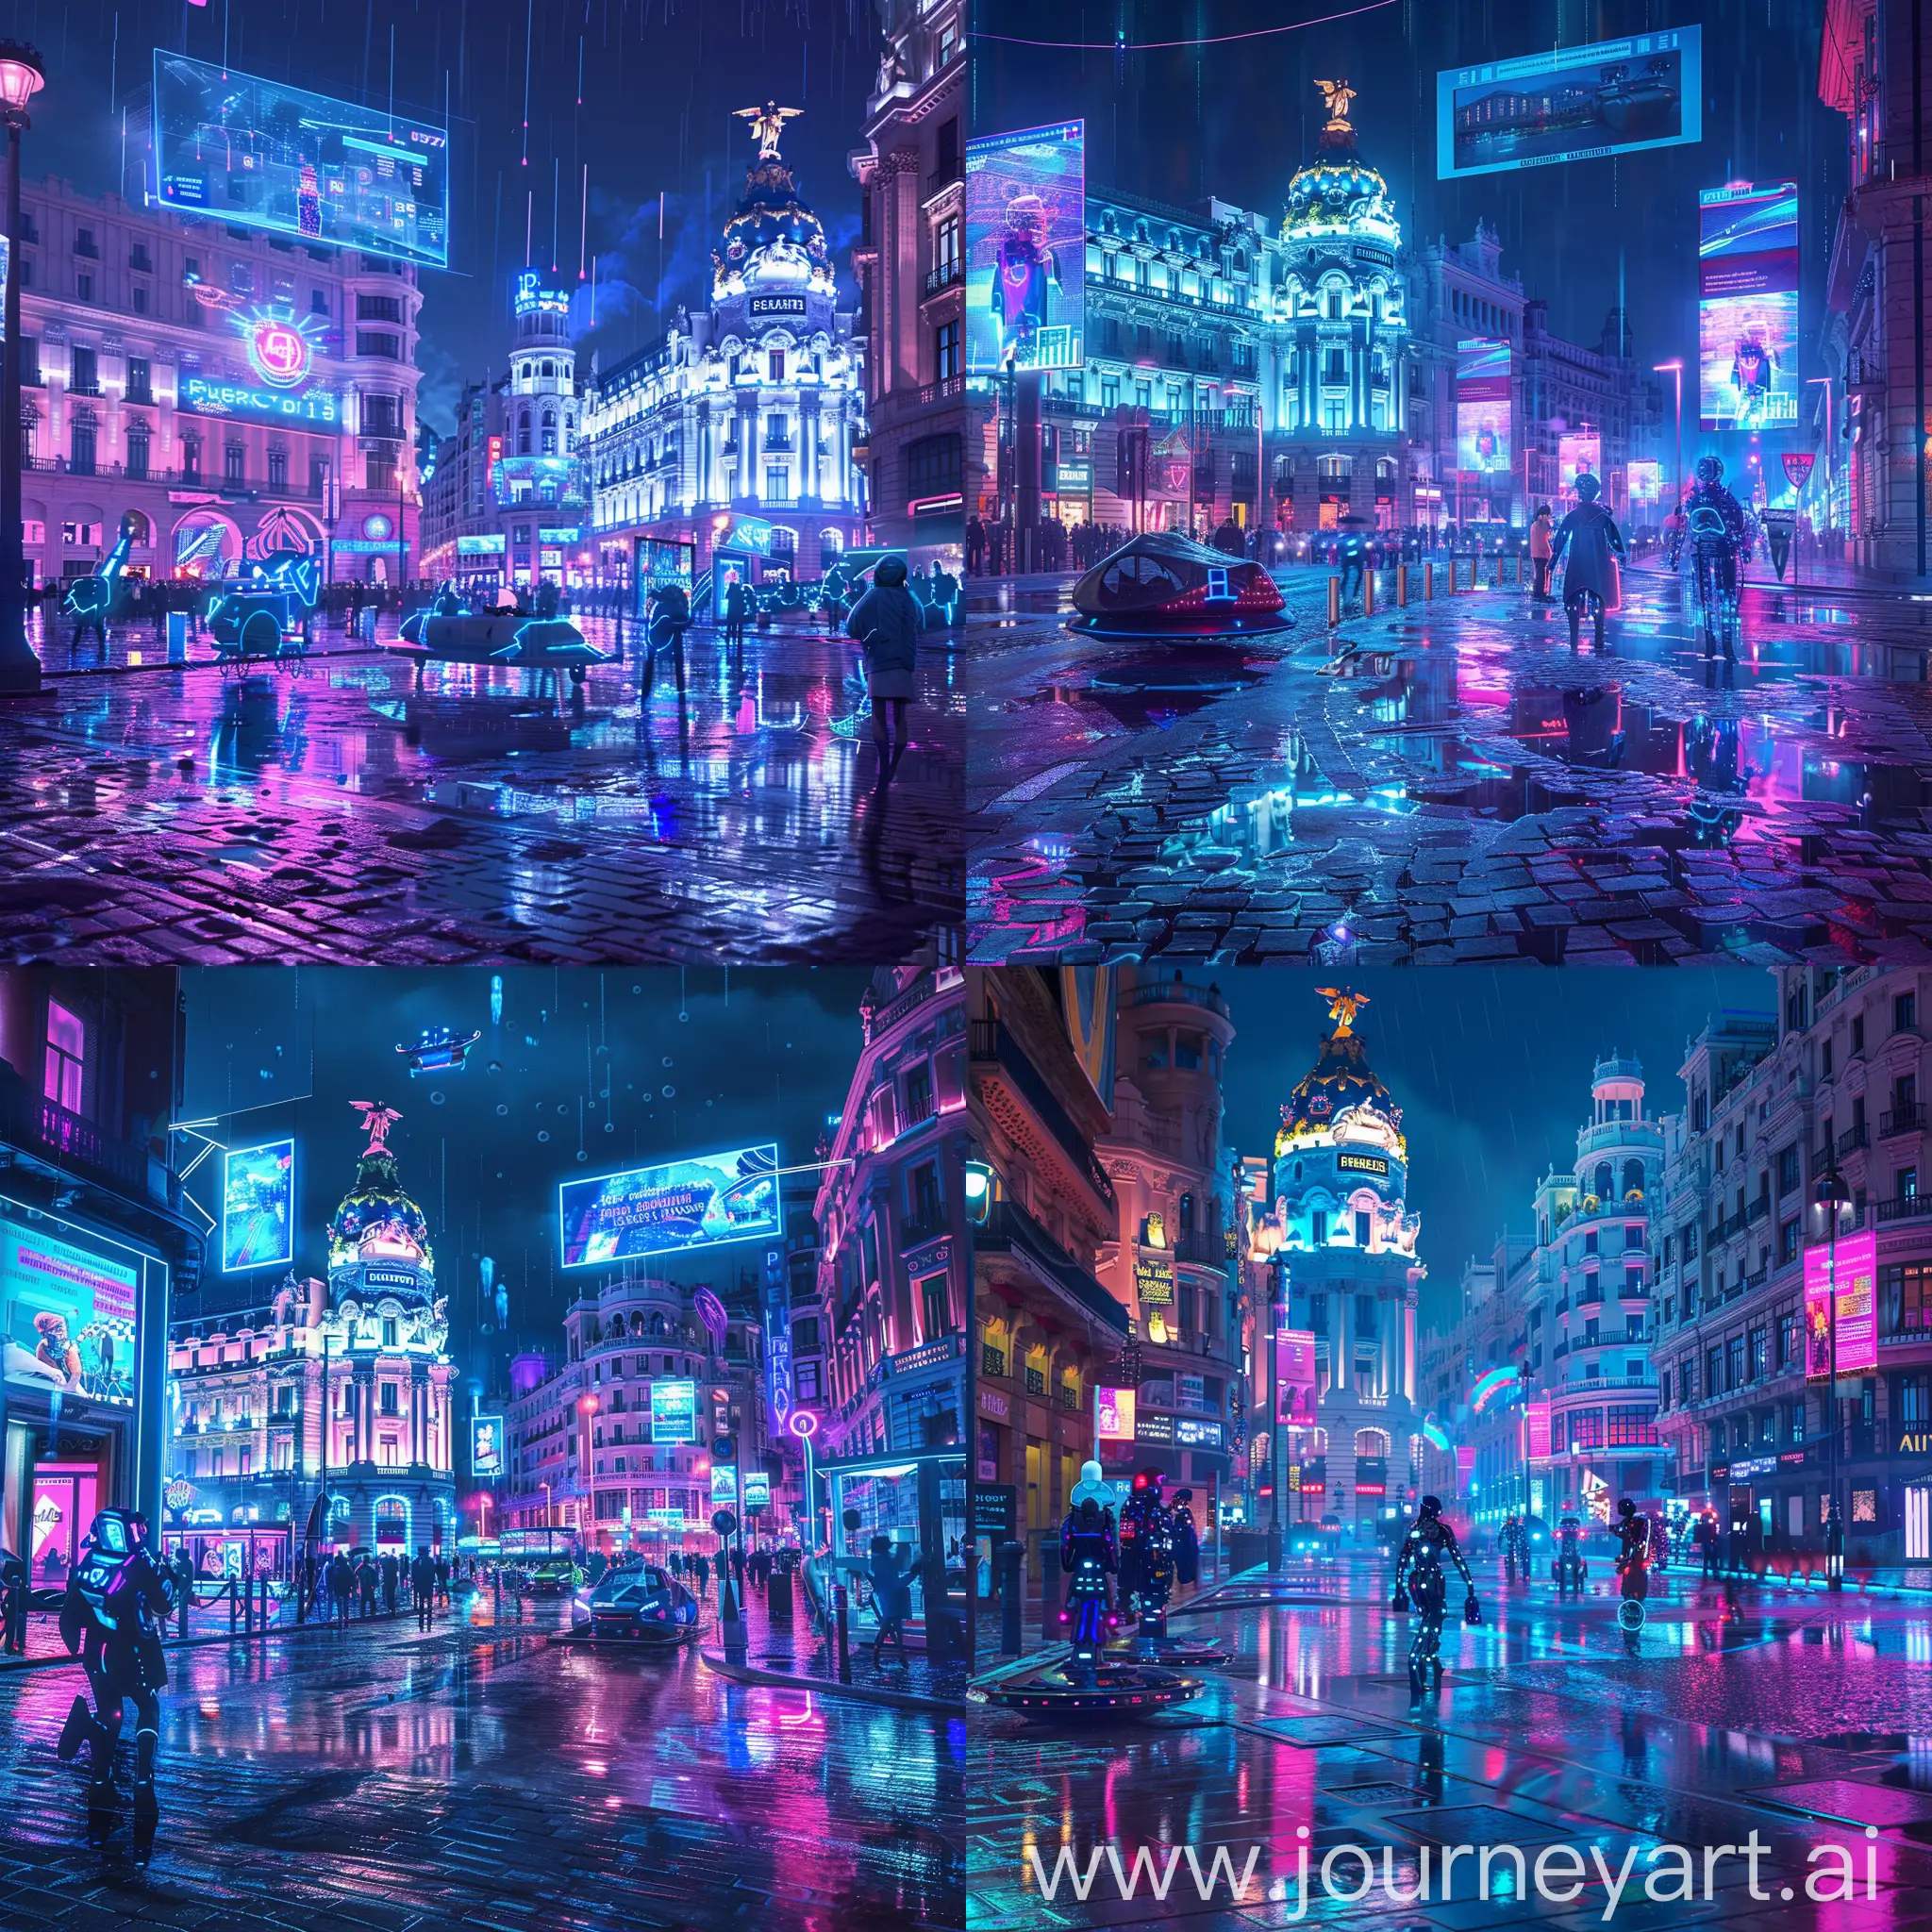 Create a cyber-punk style image of Madrid at night, featuring iconic landmarks such as the Royal Palace, the Prado Museum, and Puerta del Sol. The scene should be illuminated by neon lights in blues, purples, and pinks, reflecting off wet cobblestone streets, embodying a dystopian future. Include futuristic elements like digital billboards, hover vehicles, and robotic figures mingling with tourists. The viewpoint should simulate a tourist's experience, possibly showing interactive digital tour guides or augmented reality elements. The atmosphere should vividly contrast historic architecture with high-tech decay